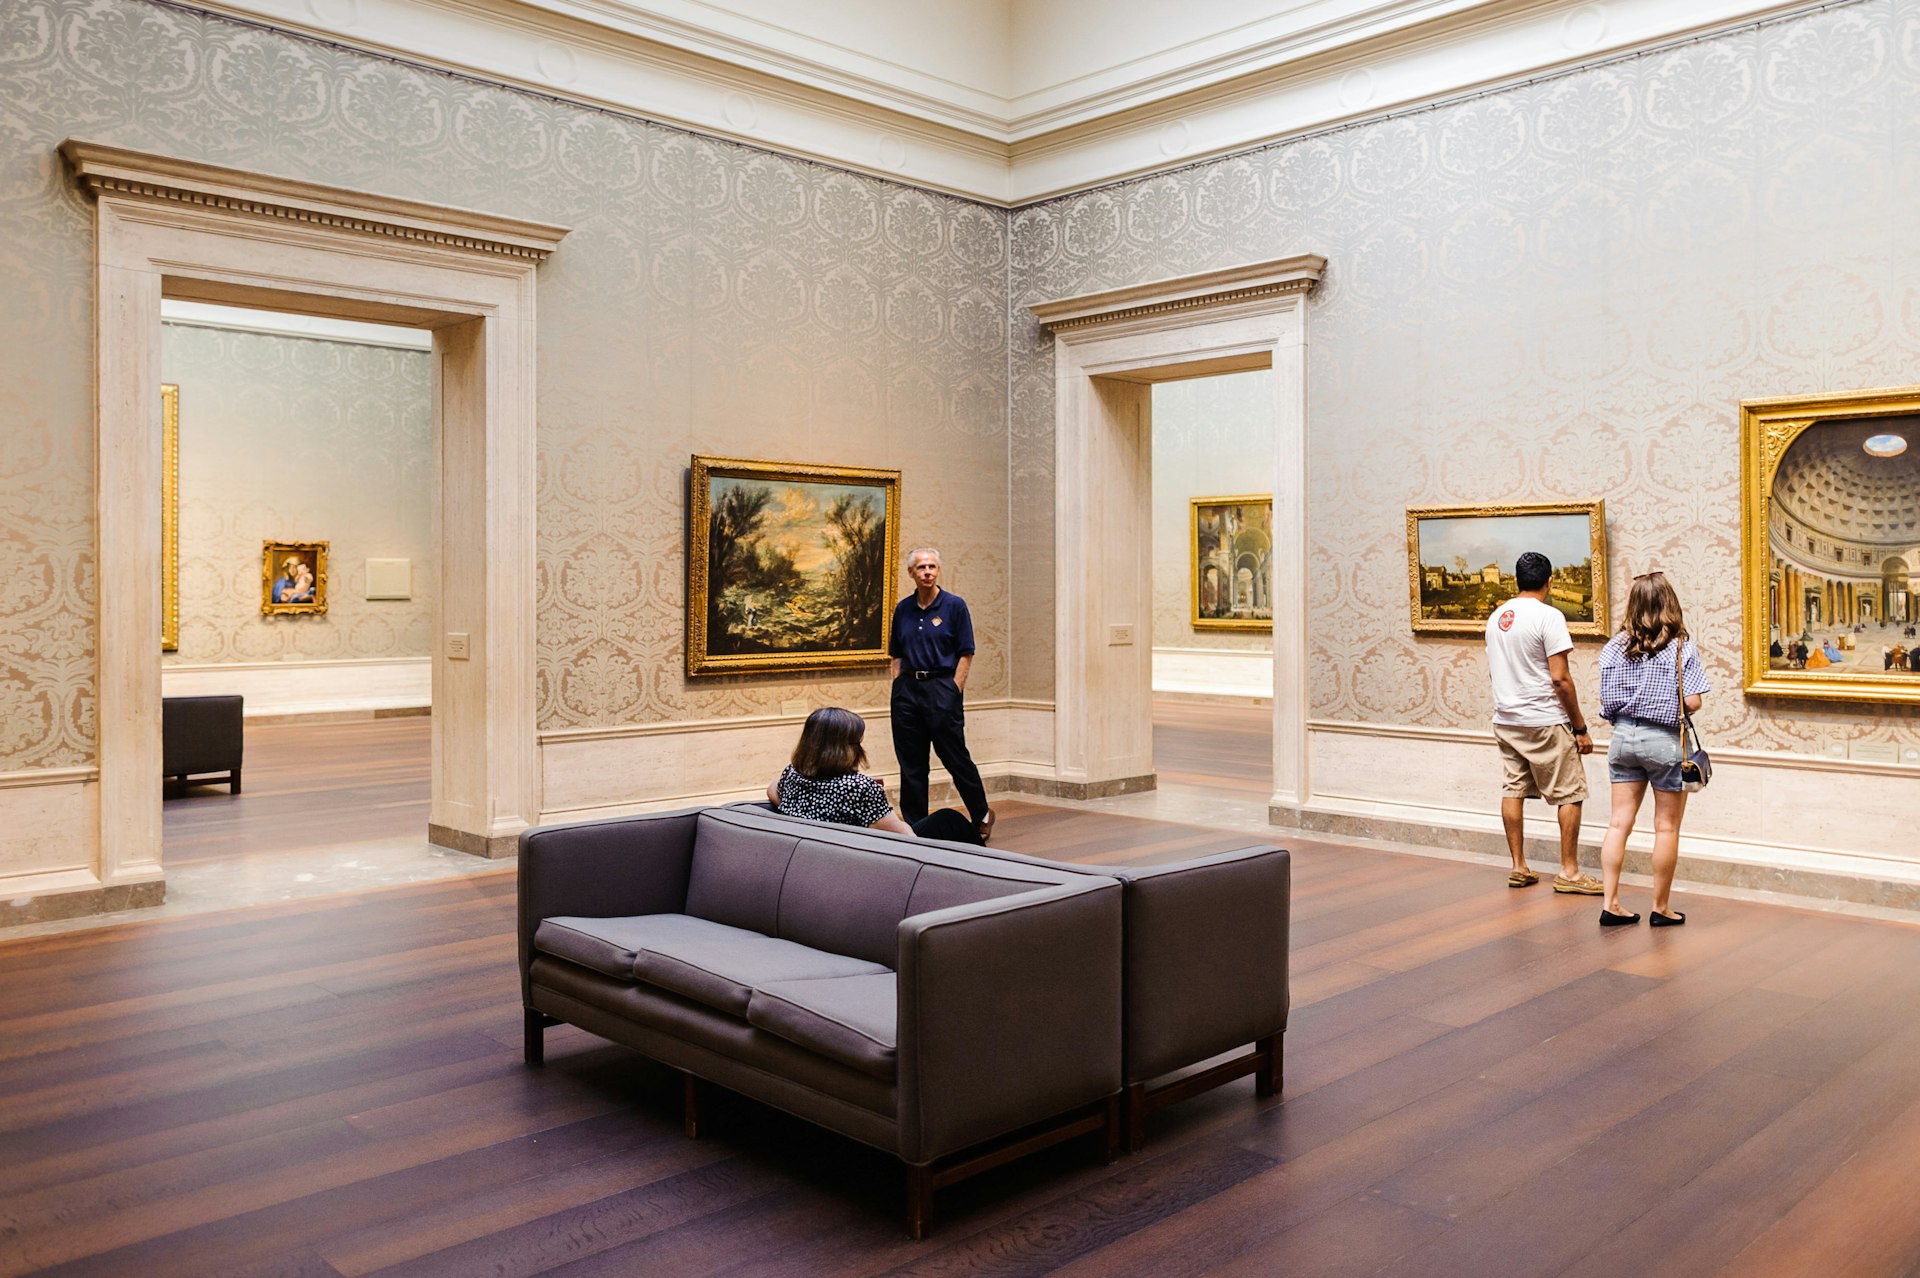 The interior of an art gallery. There is couch in the middle of the room and a few people viewing paintings on the wall.